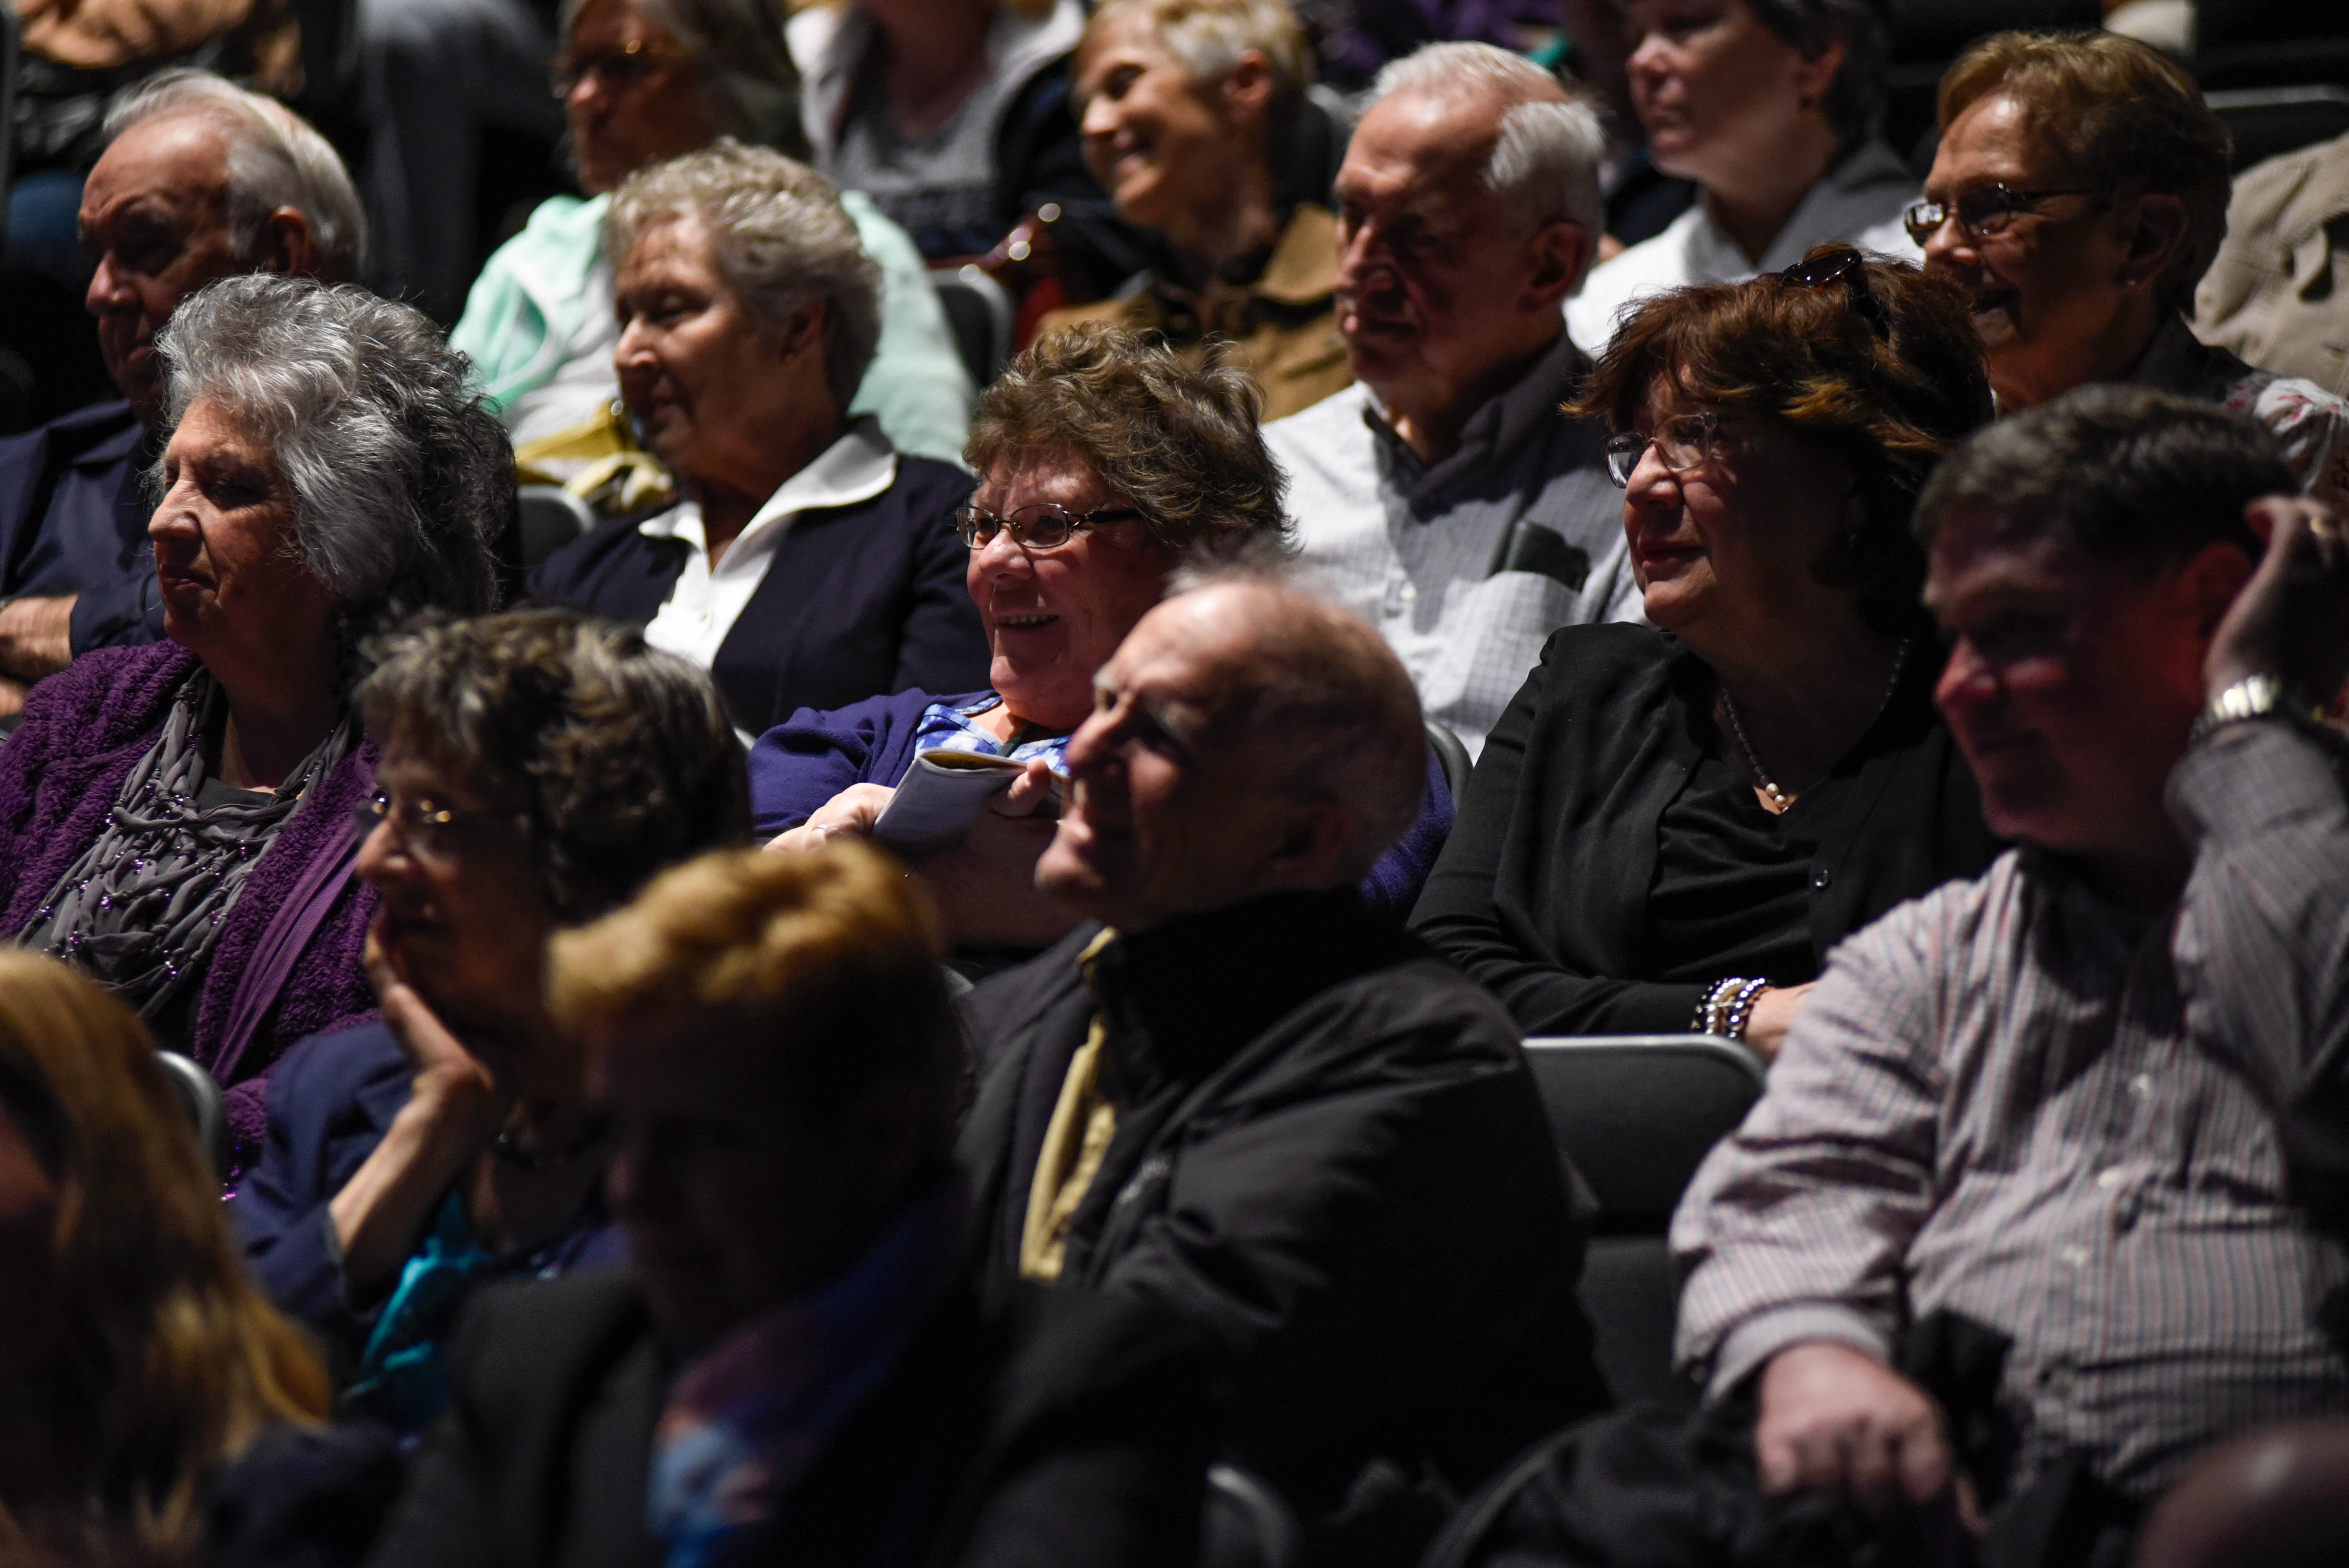 Audience members engage with members of the cast of Cabaret during TheatreTalk, a conversation with artists, in GE Theatre at Proctors Thursday, May 11, 2017.